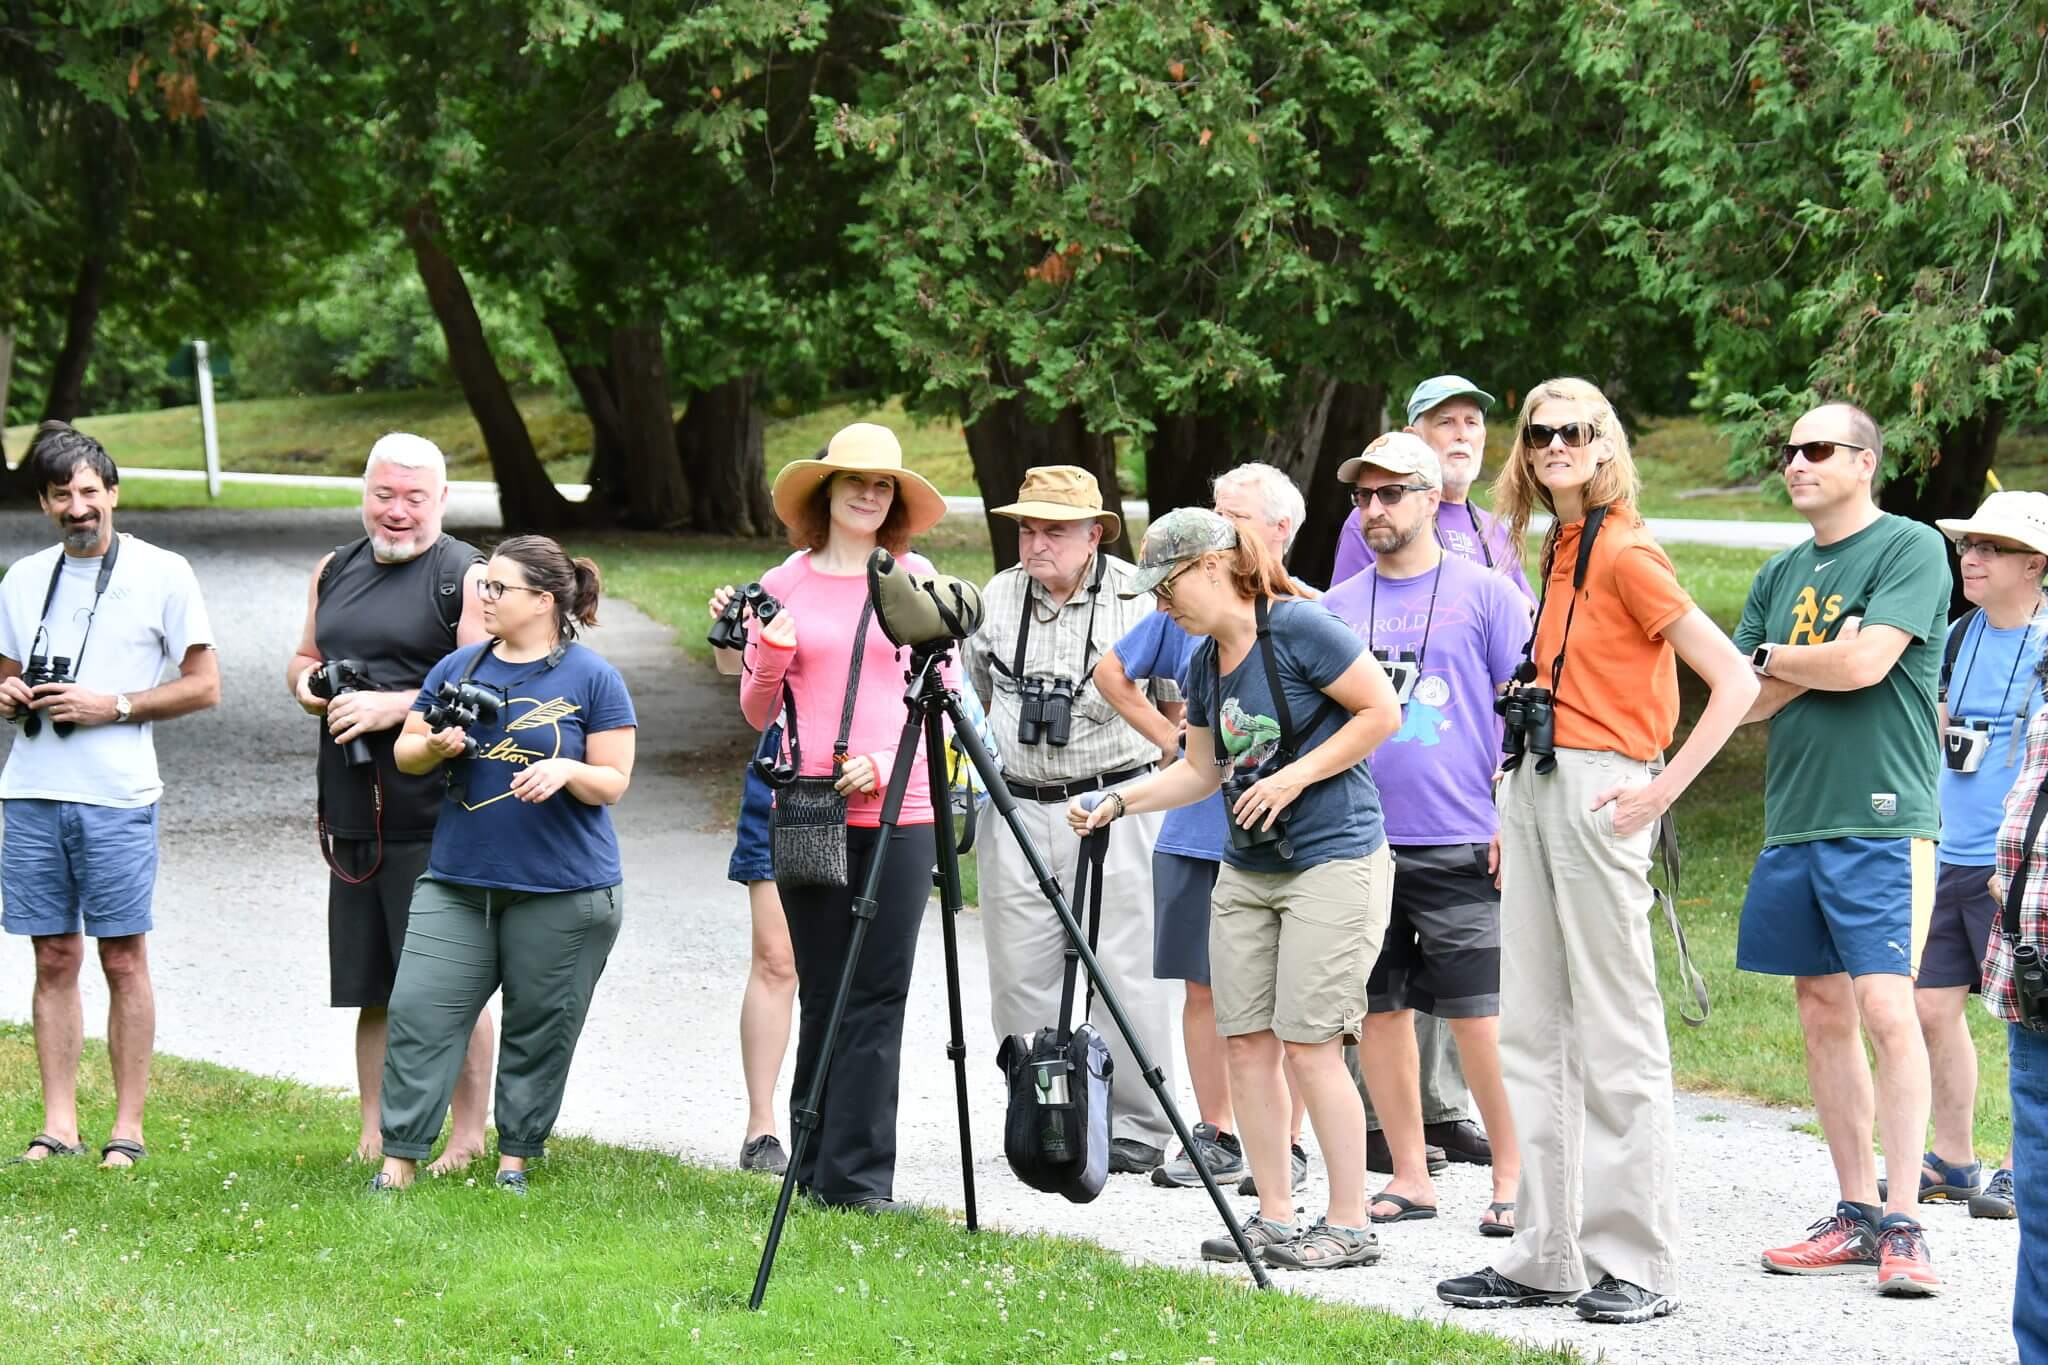 group of adult guests birdwatching